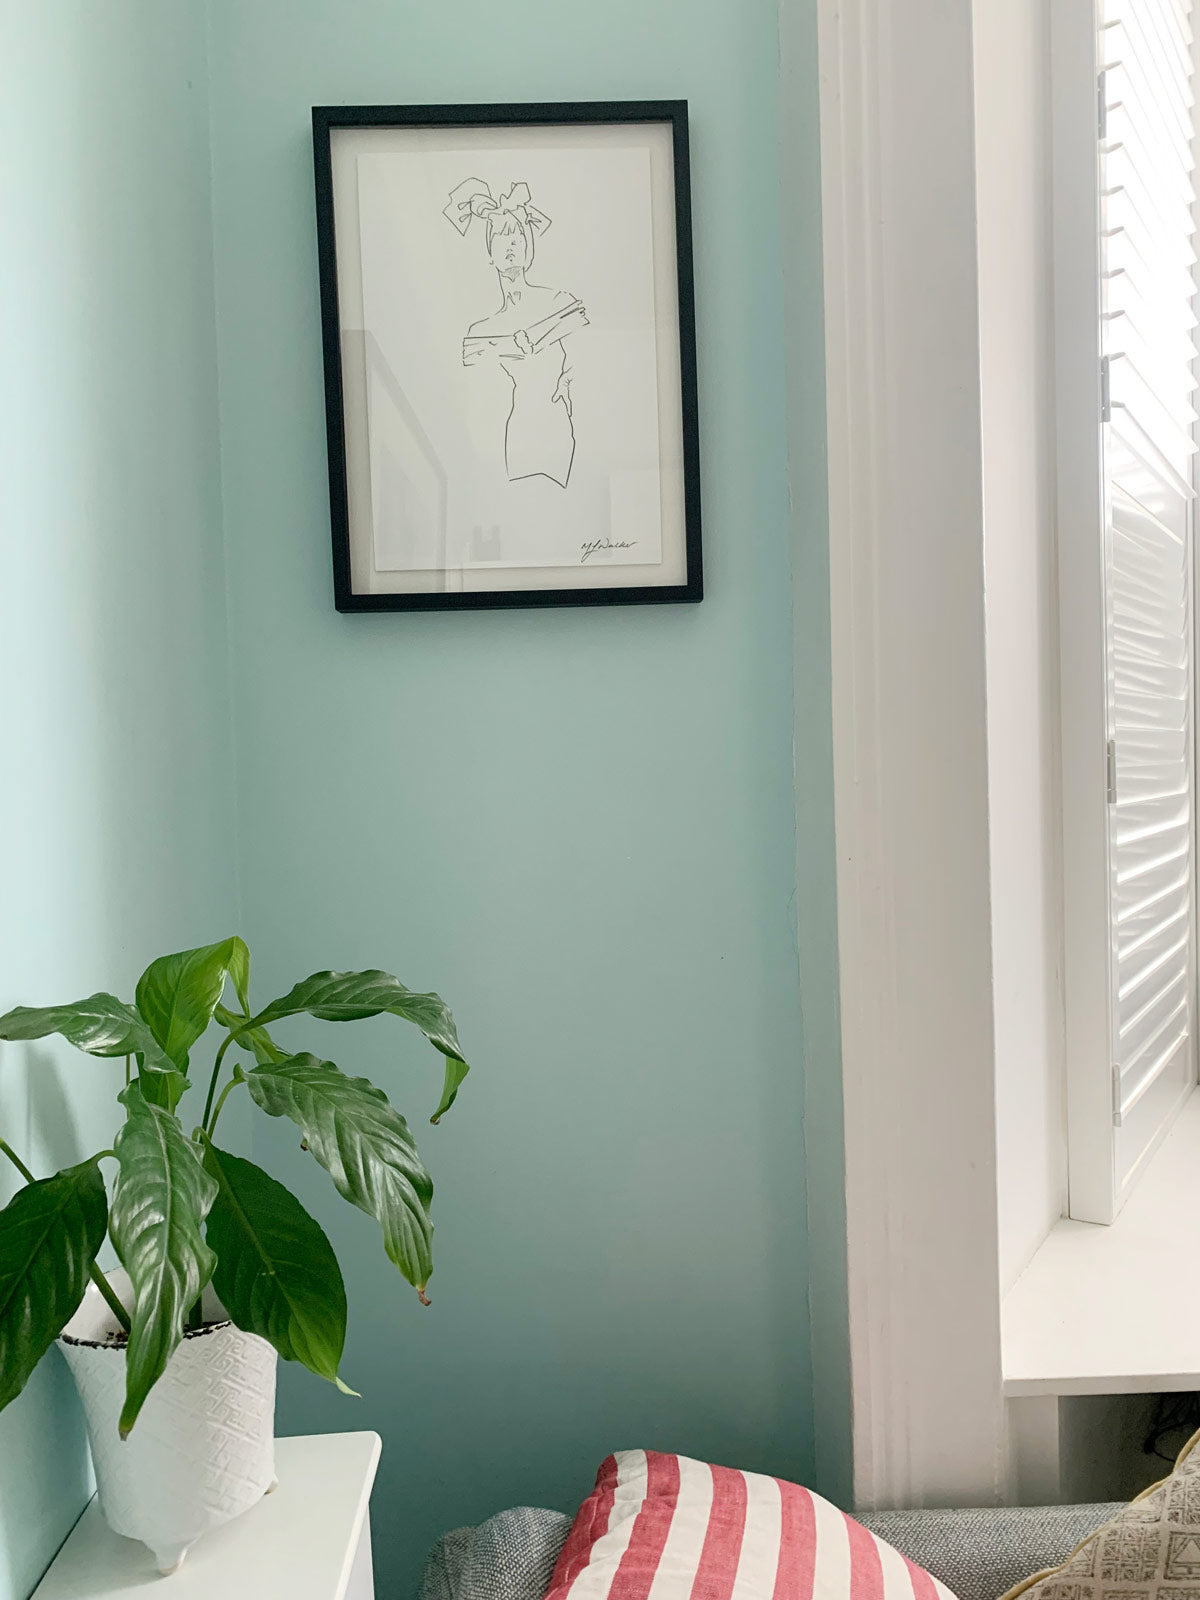 Lady in a headscarf illustration framed. Hanging on a blue wall.